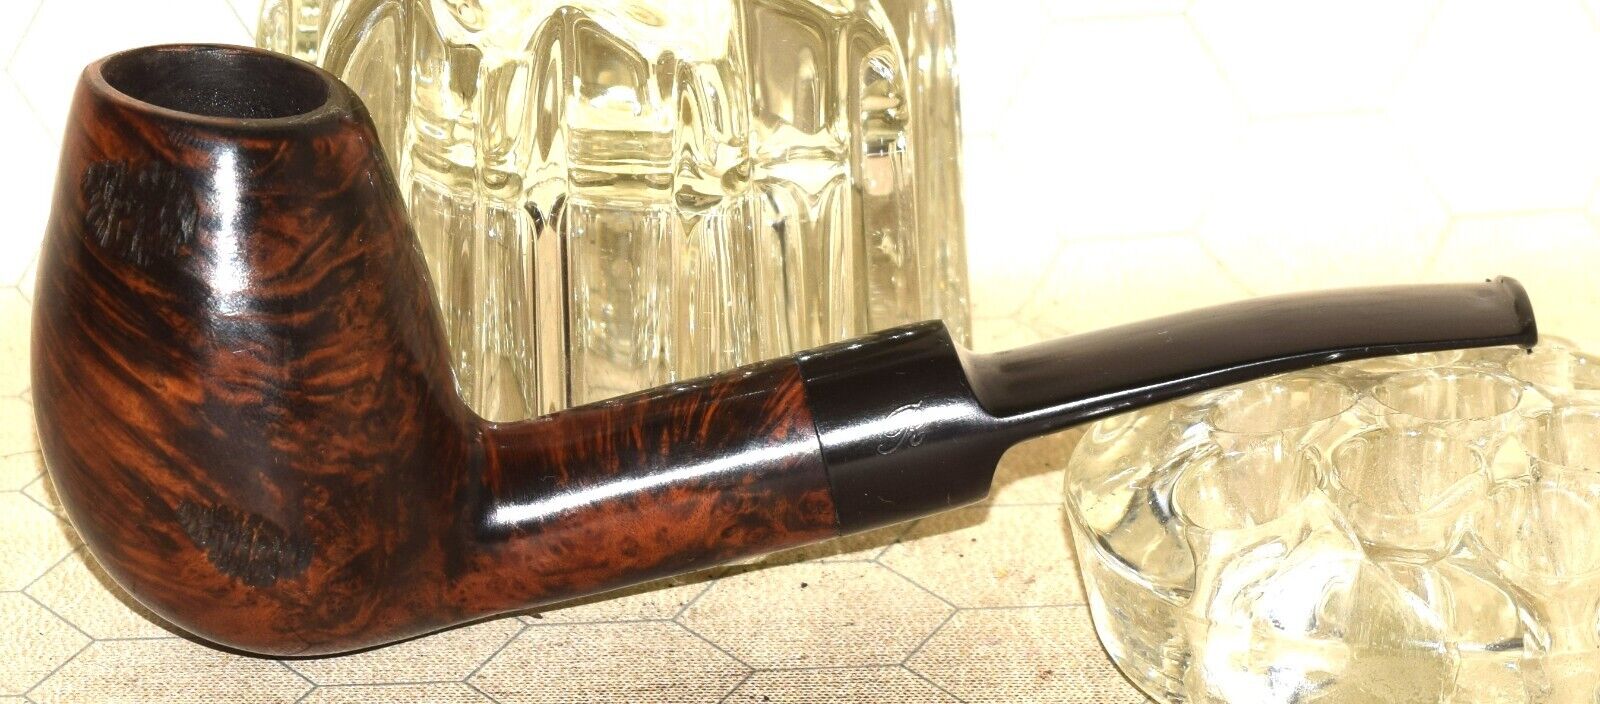 REFBJERG HAND-CARVED MADE IN DENMARK SECOND 9mm Tobacco Pipe #C033